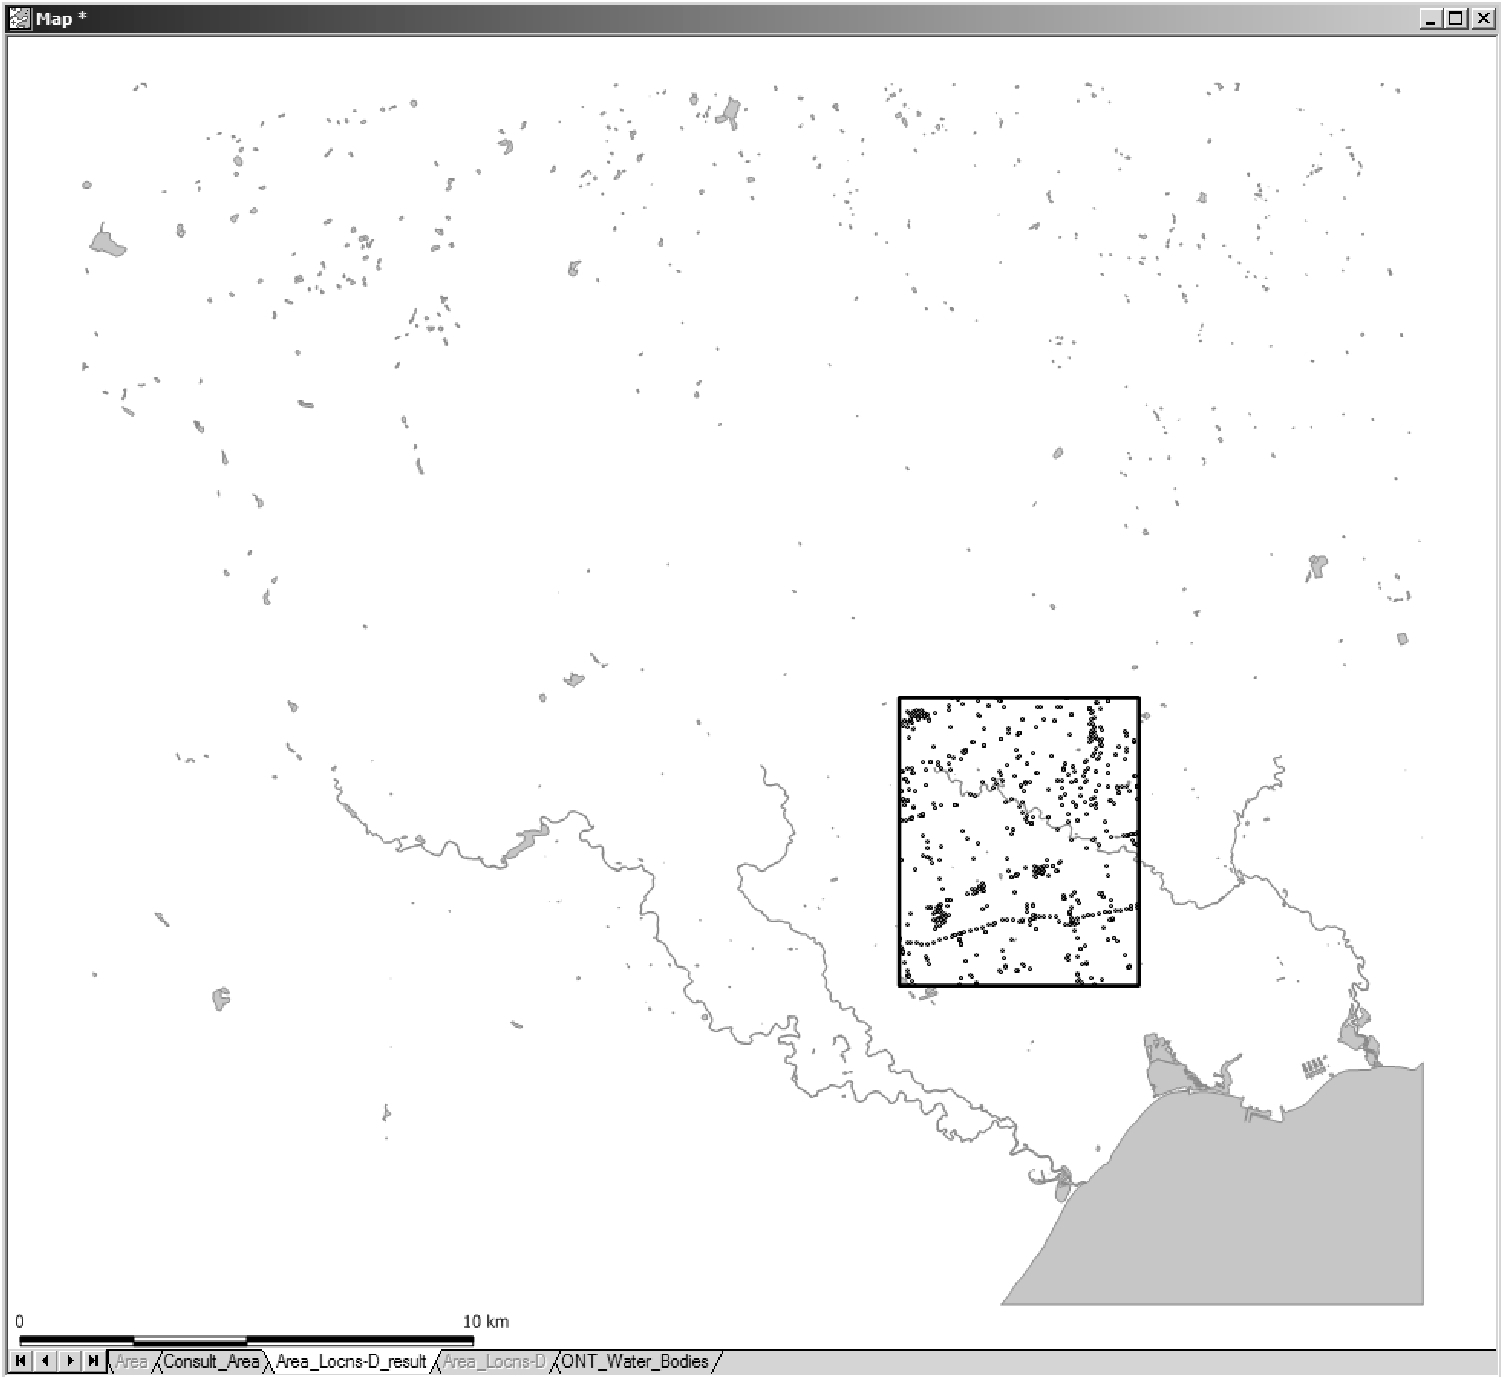 Figure J.3.8 Spatial query results